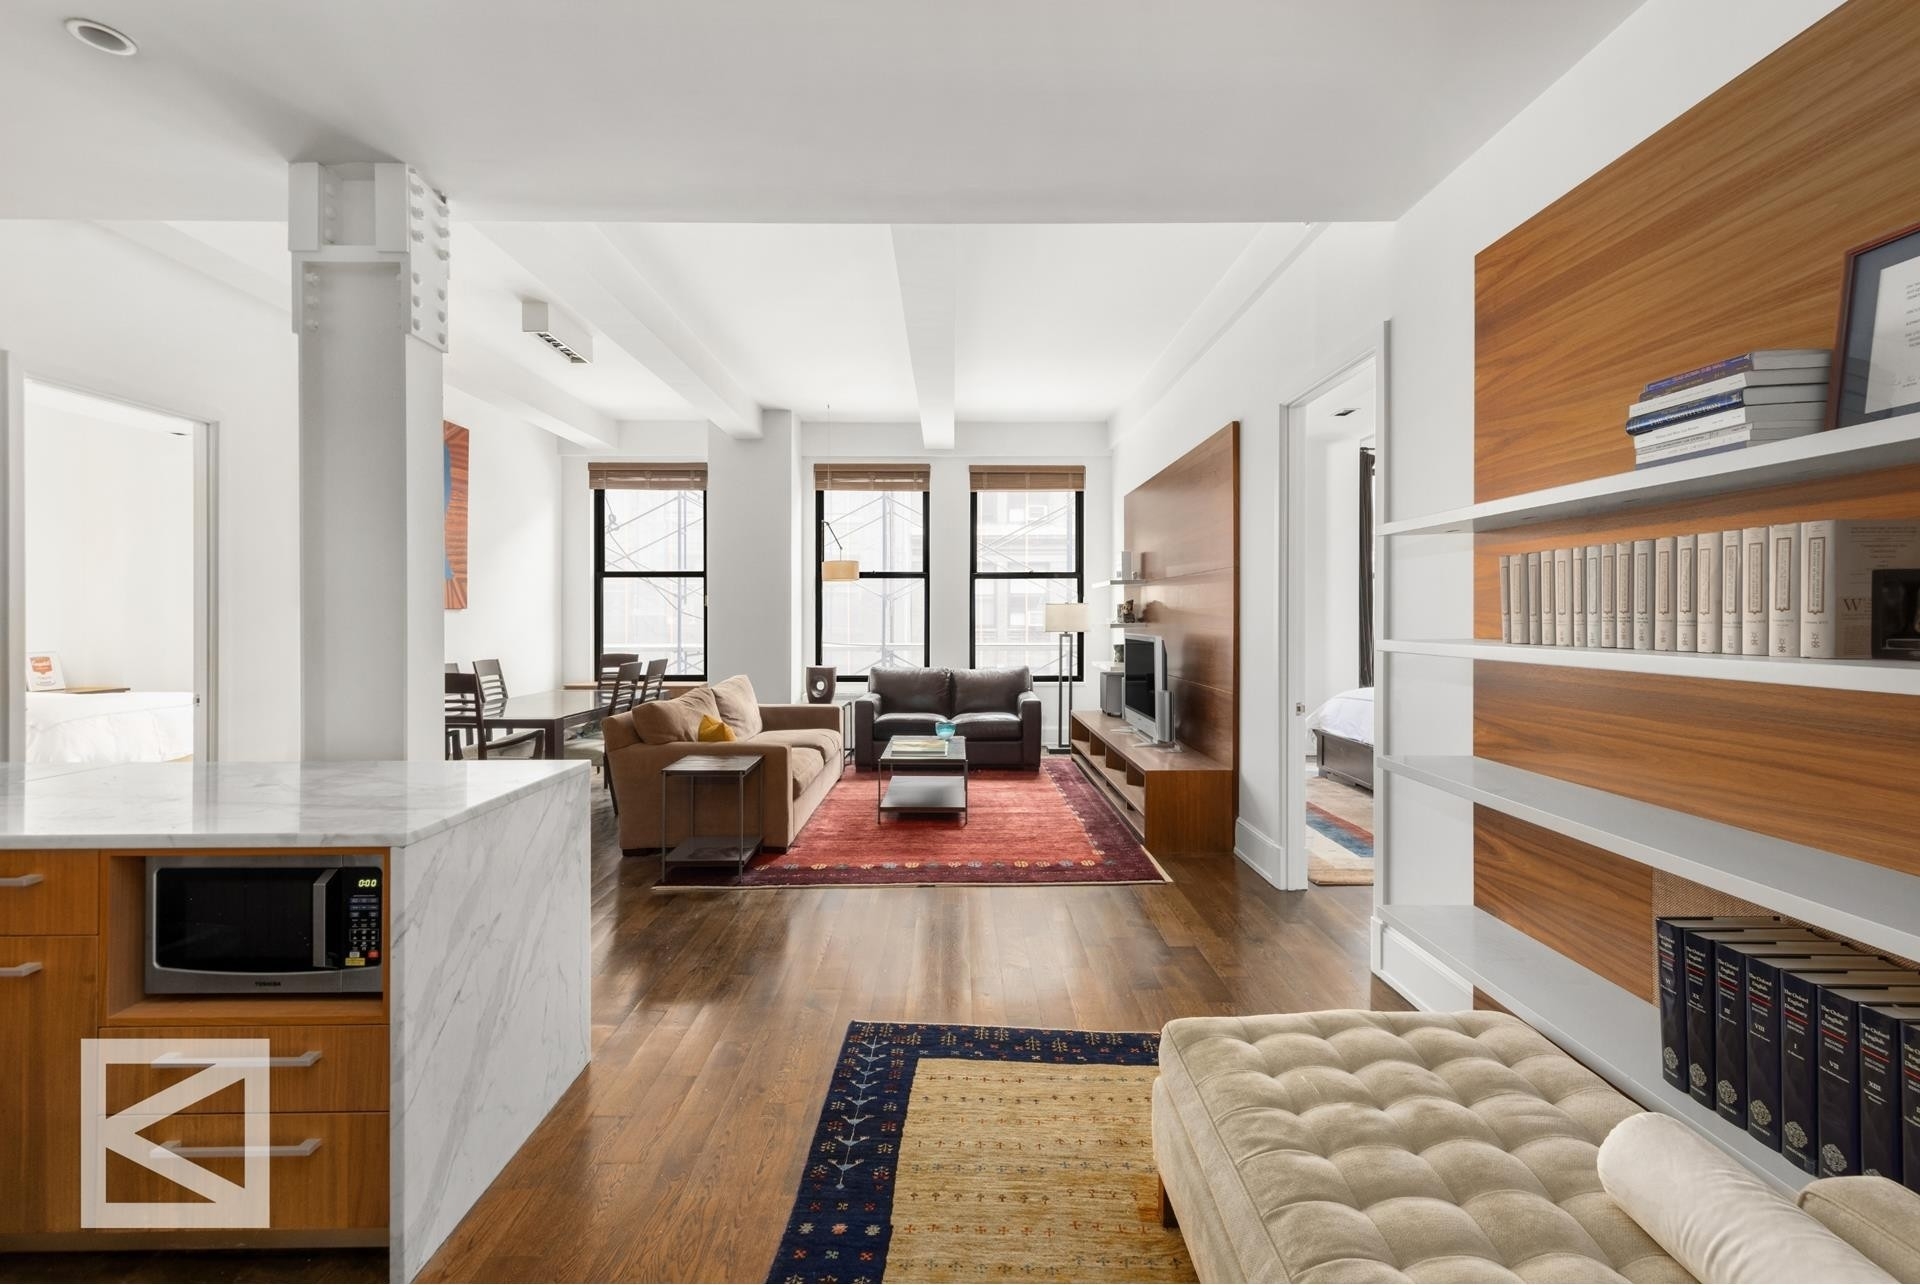 Property at 260 PARK AVE S, 9A Flatiron District, New York, New York 10010